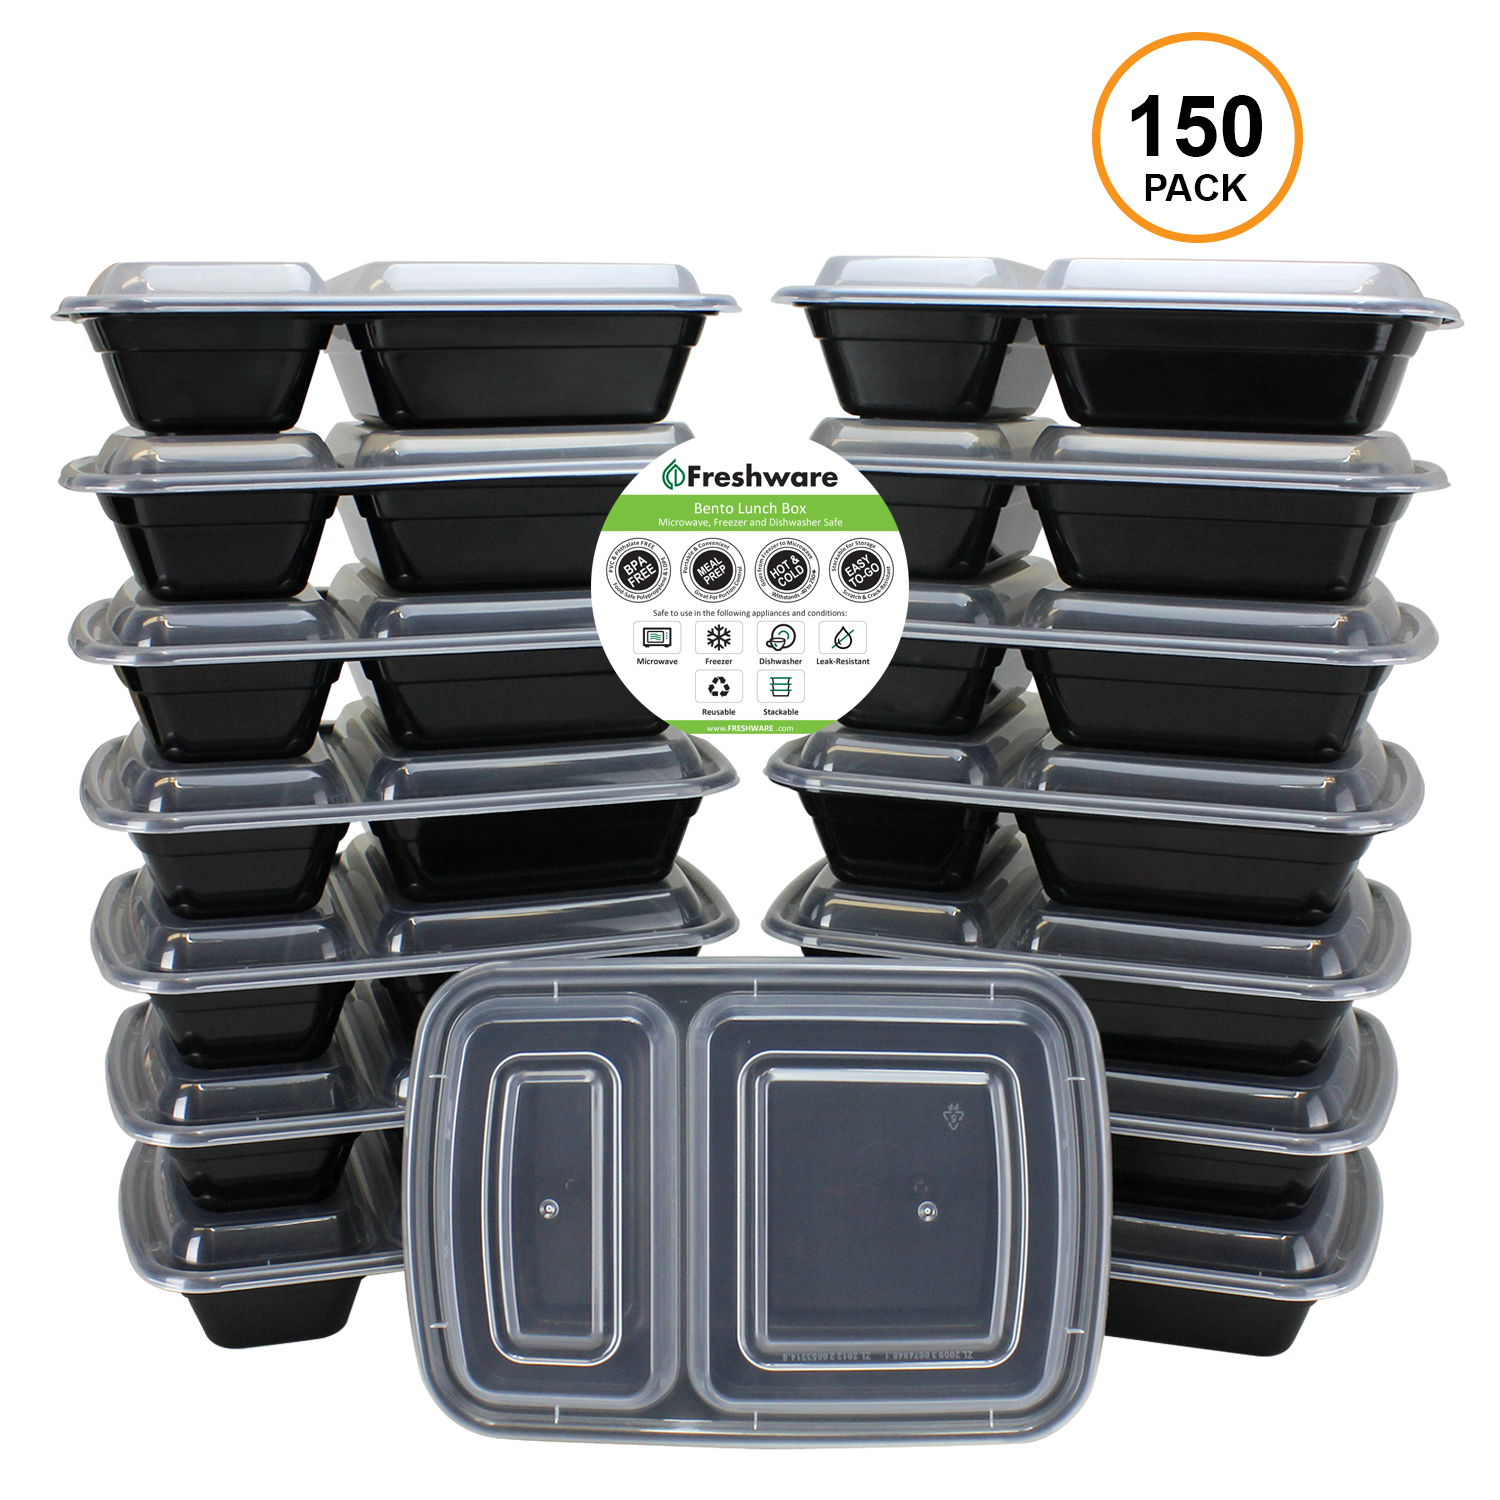 Freshware 150-Pack 2 Compartment Bento Lunch Boxes with Lids - Meal Prep, Portion Control, 21 Day Fix & Food Storage Containers (25oz)